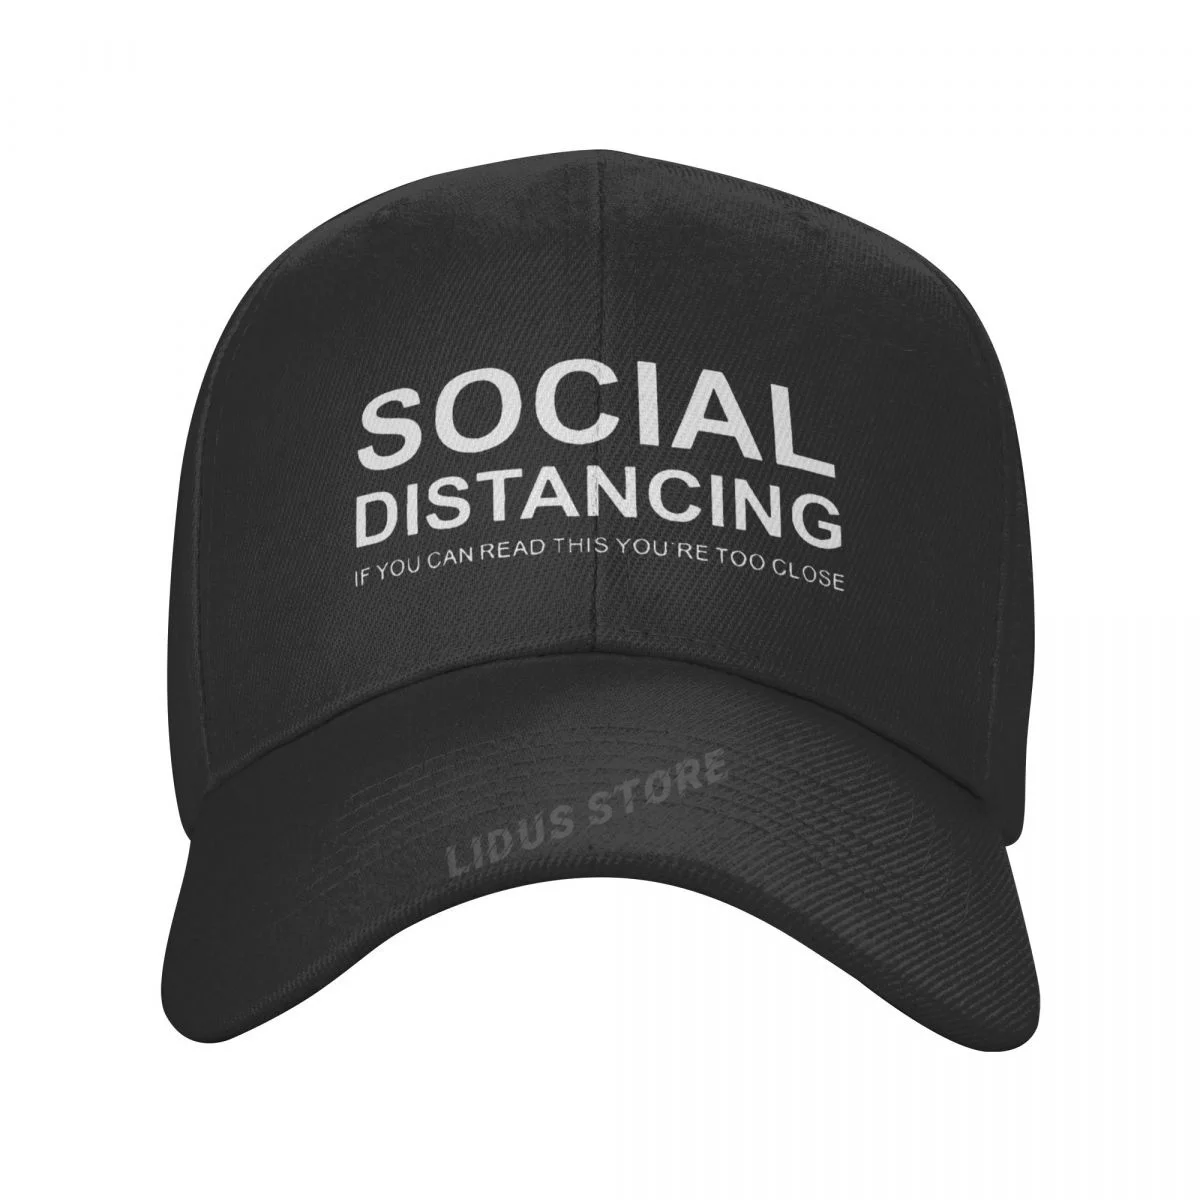 

SOCIAL DISTANCING IF YOU CAN READ THIS YOU'RE TOO CLOSE Letter Women Baseball Cap Summer Harajuku Print Snapback Hat